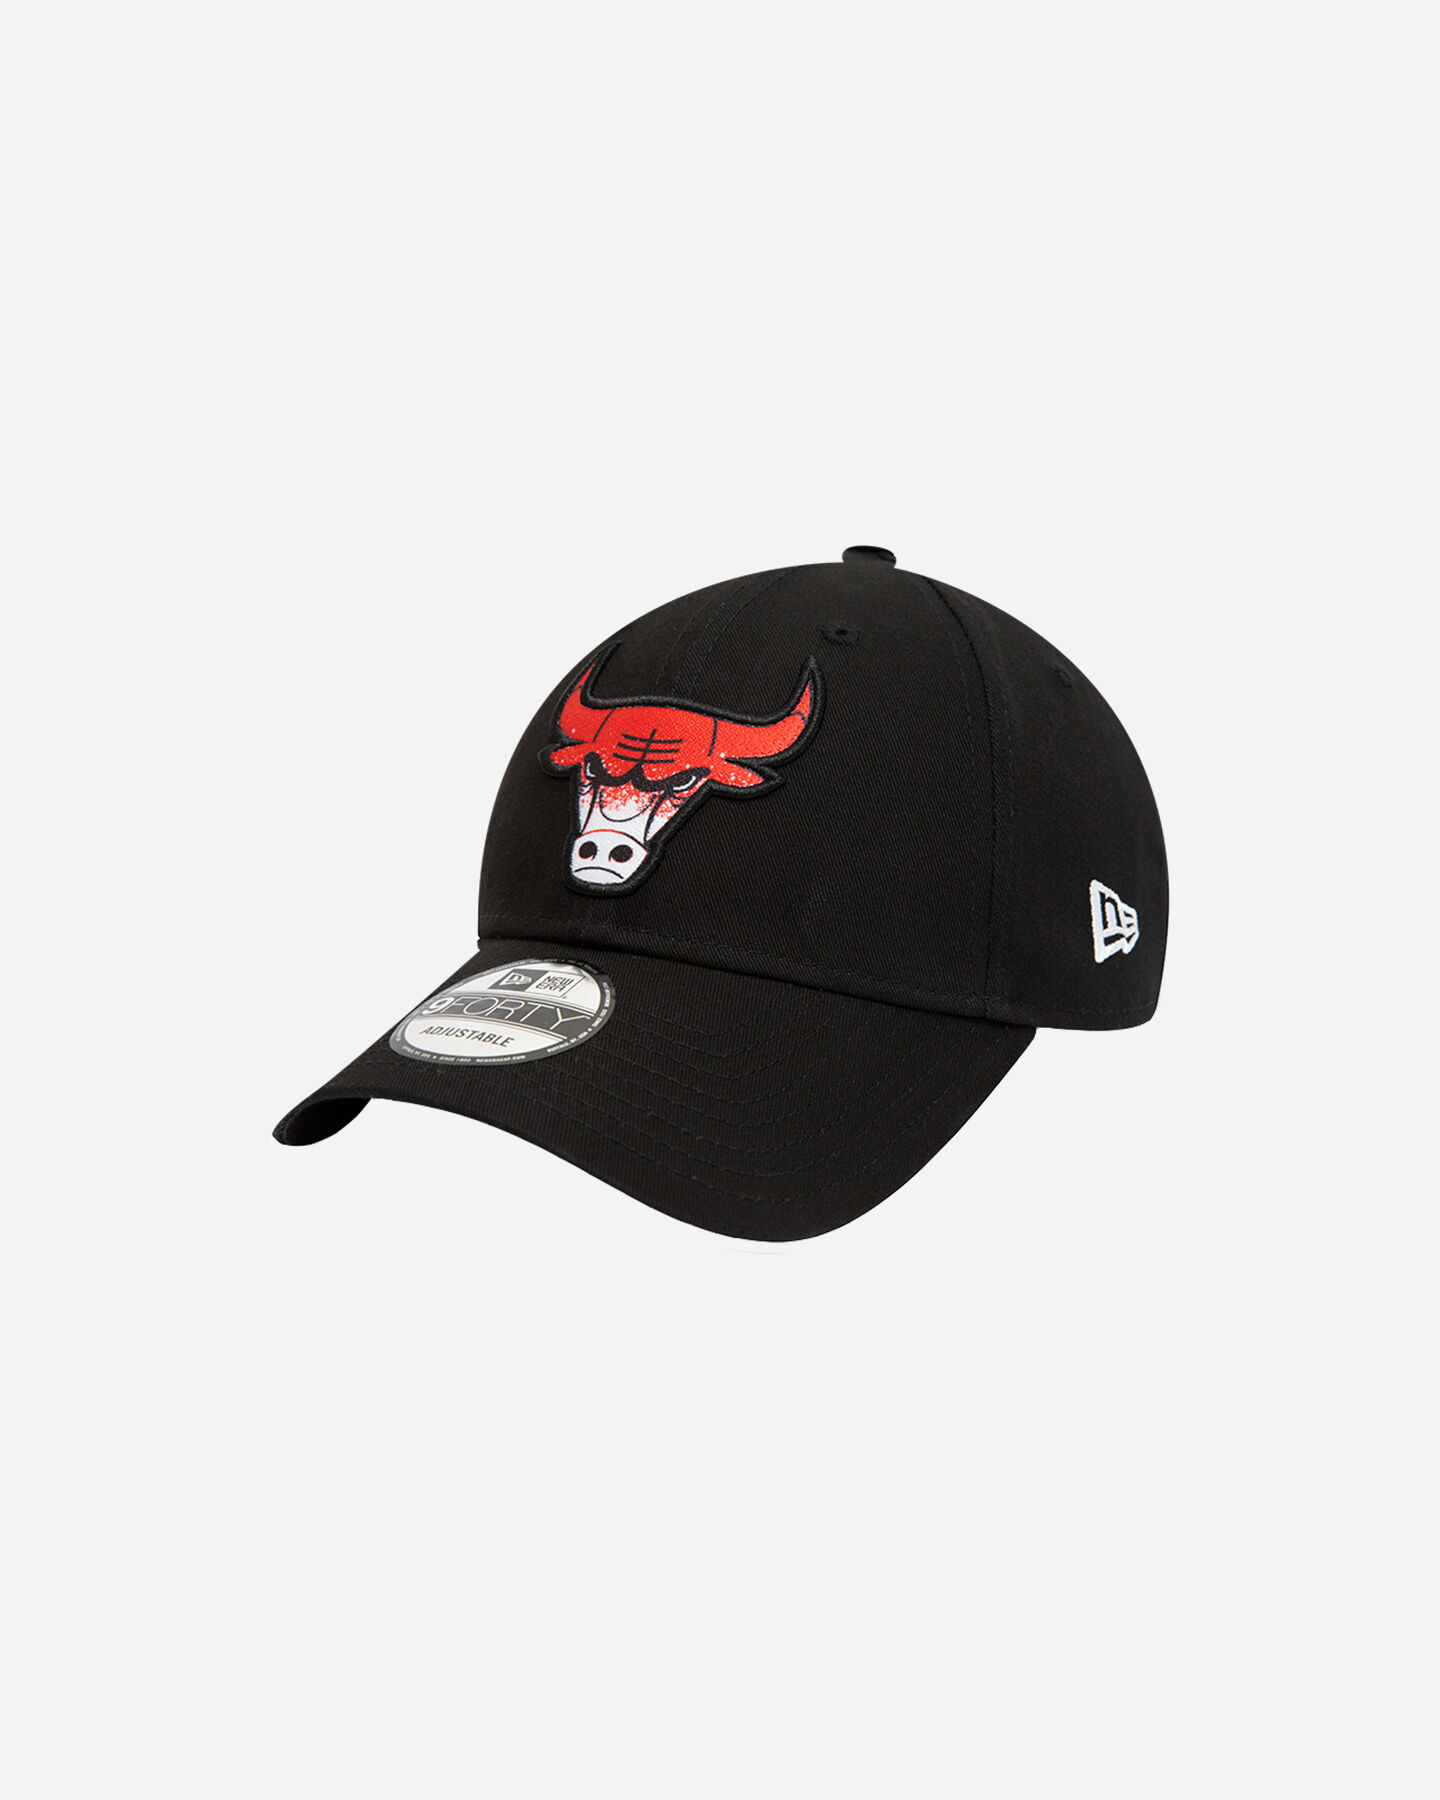  Cappellino NEW ERA 9FORTY INFILL CHICAGO BULLS  S5546153|001|OSFM scatto 0